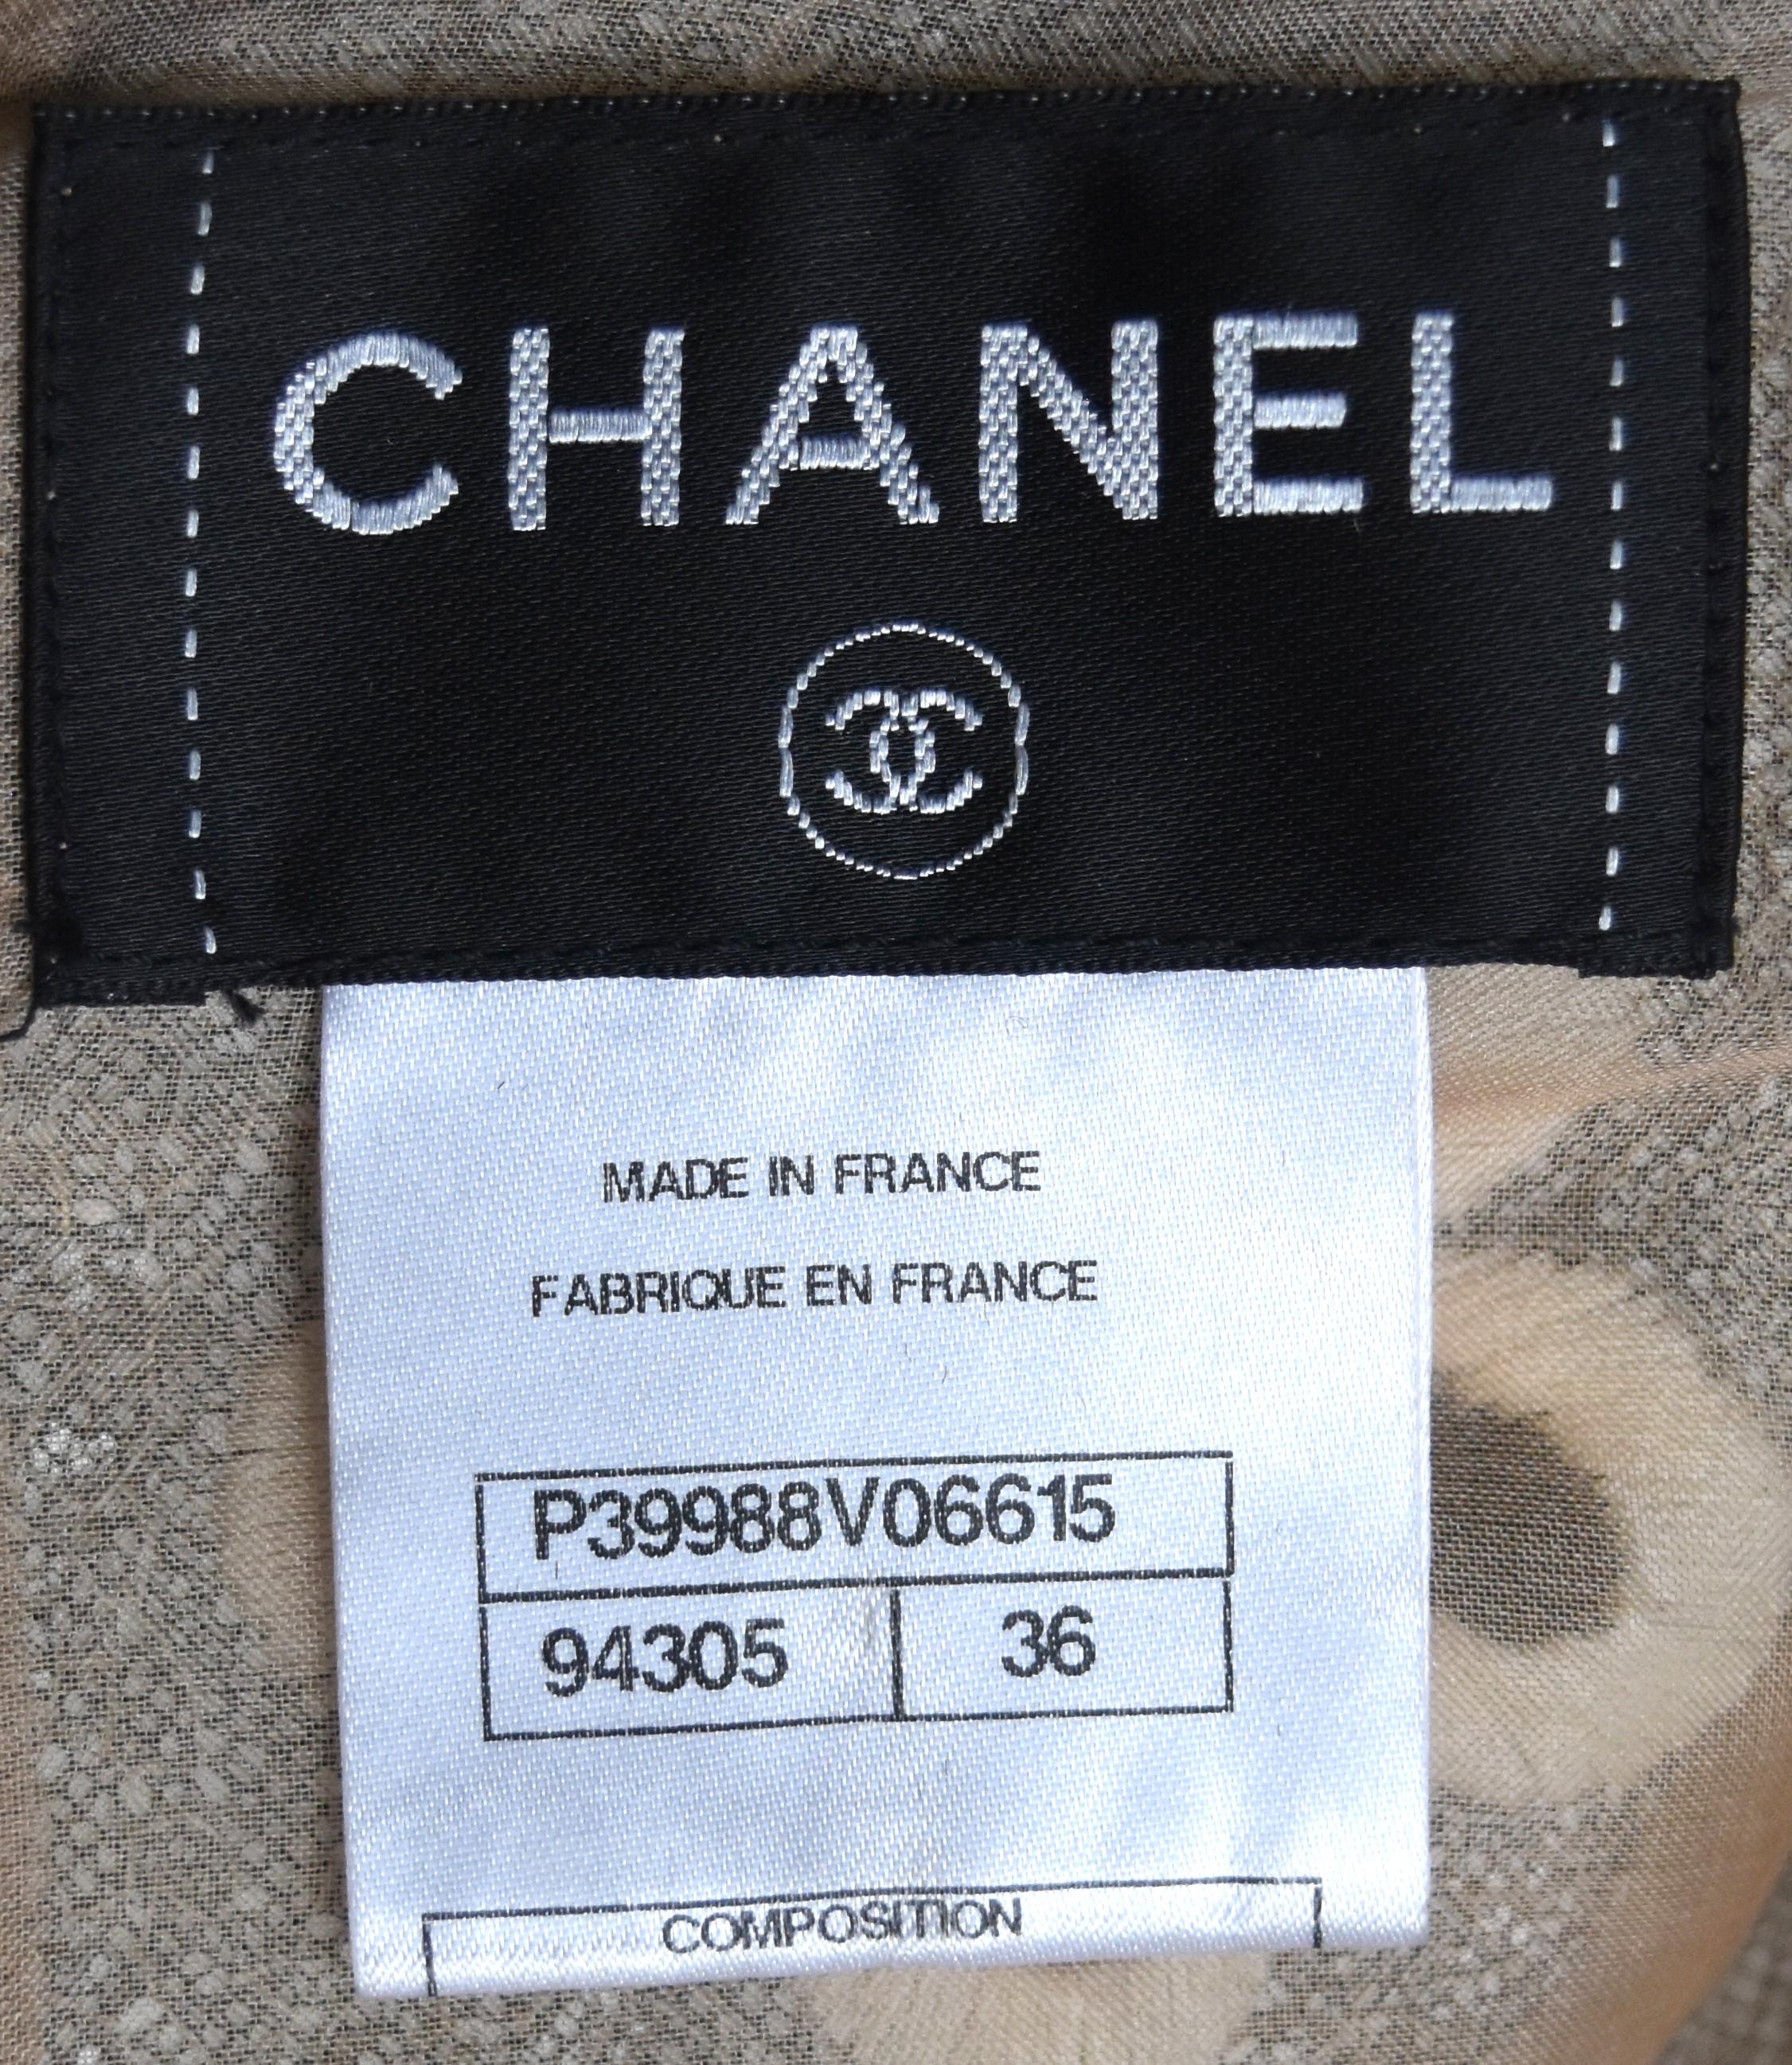 Chanel 11C Cruise 2011 Sequins Embellished runway Dress New Europe 36 For Sale 3